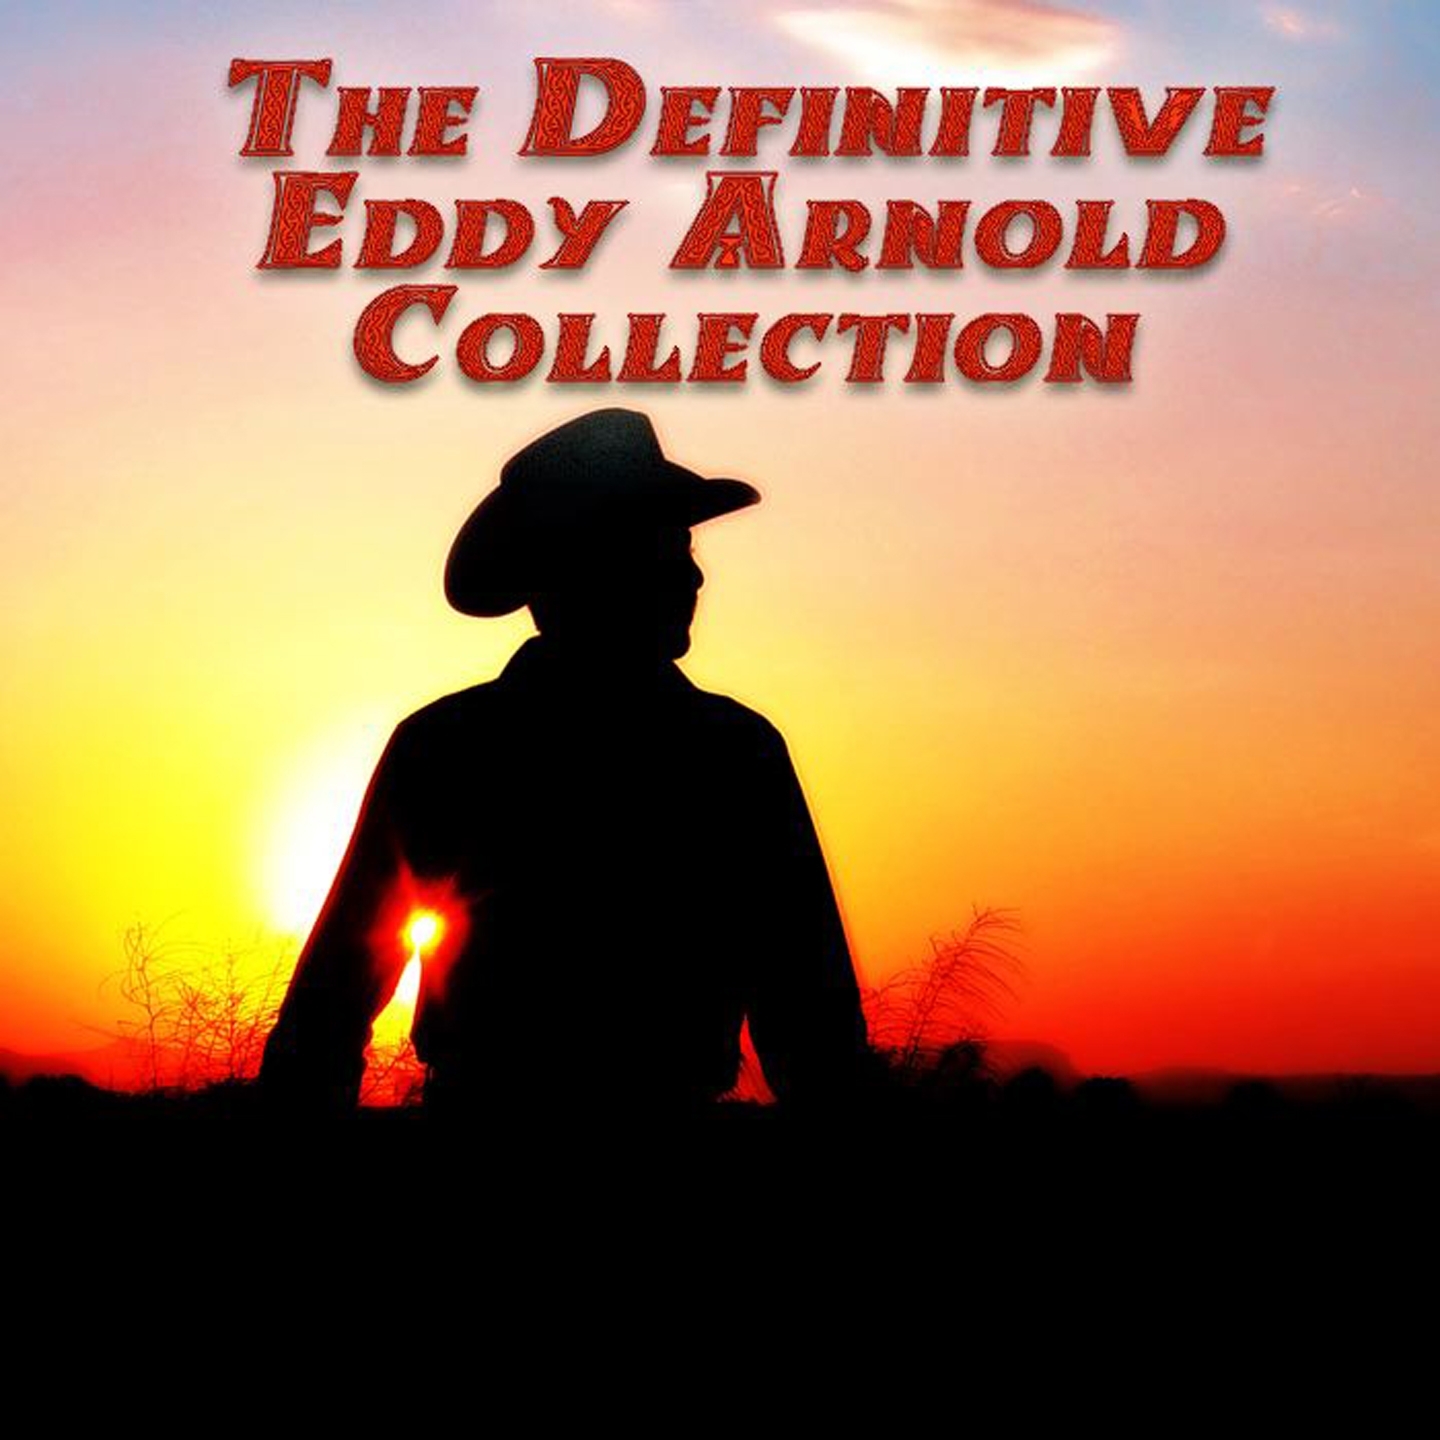 The Definitive Collection of Eddy Arnold